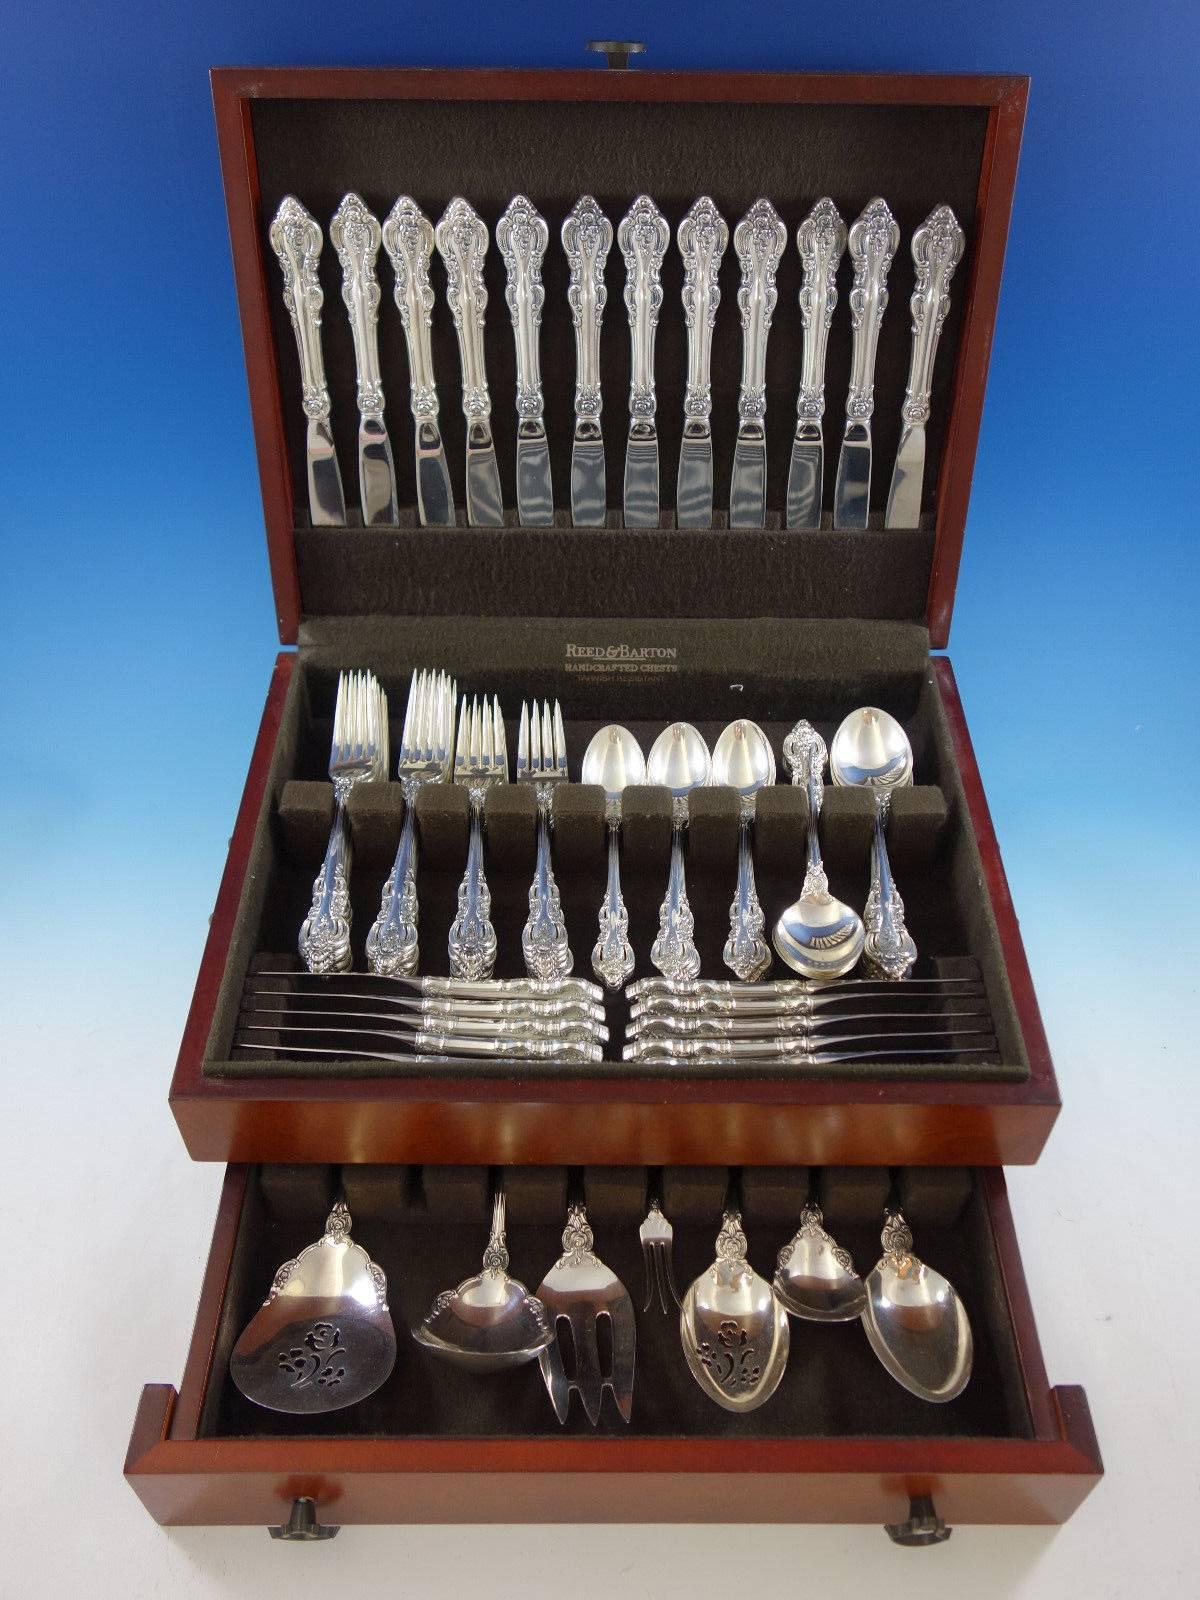 El Grandee by Towle sterling silver flatware set, 79 pieces. This set includes: 

12 knives, 9